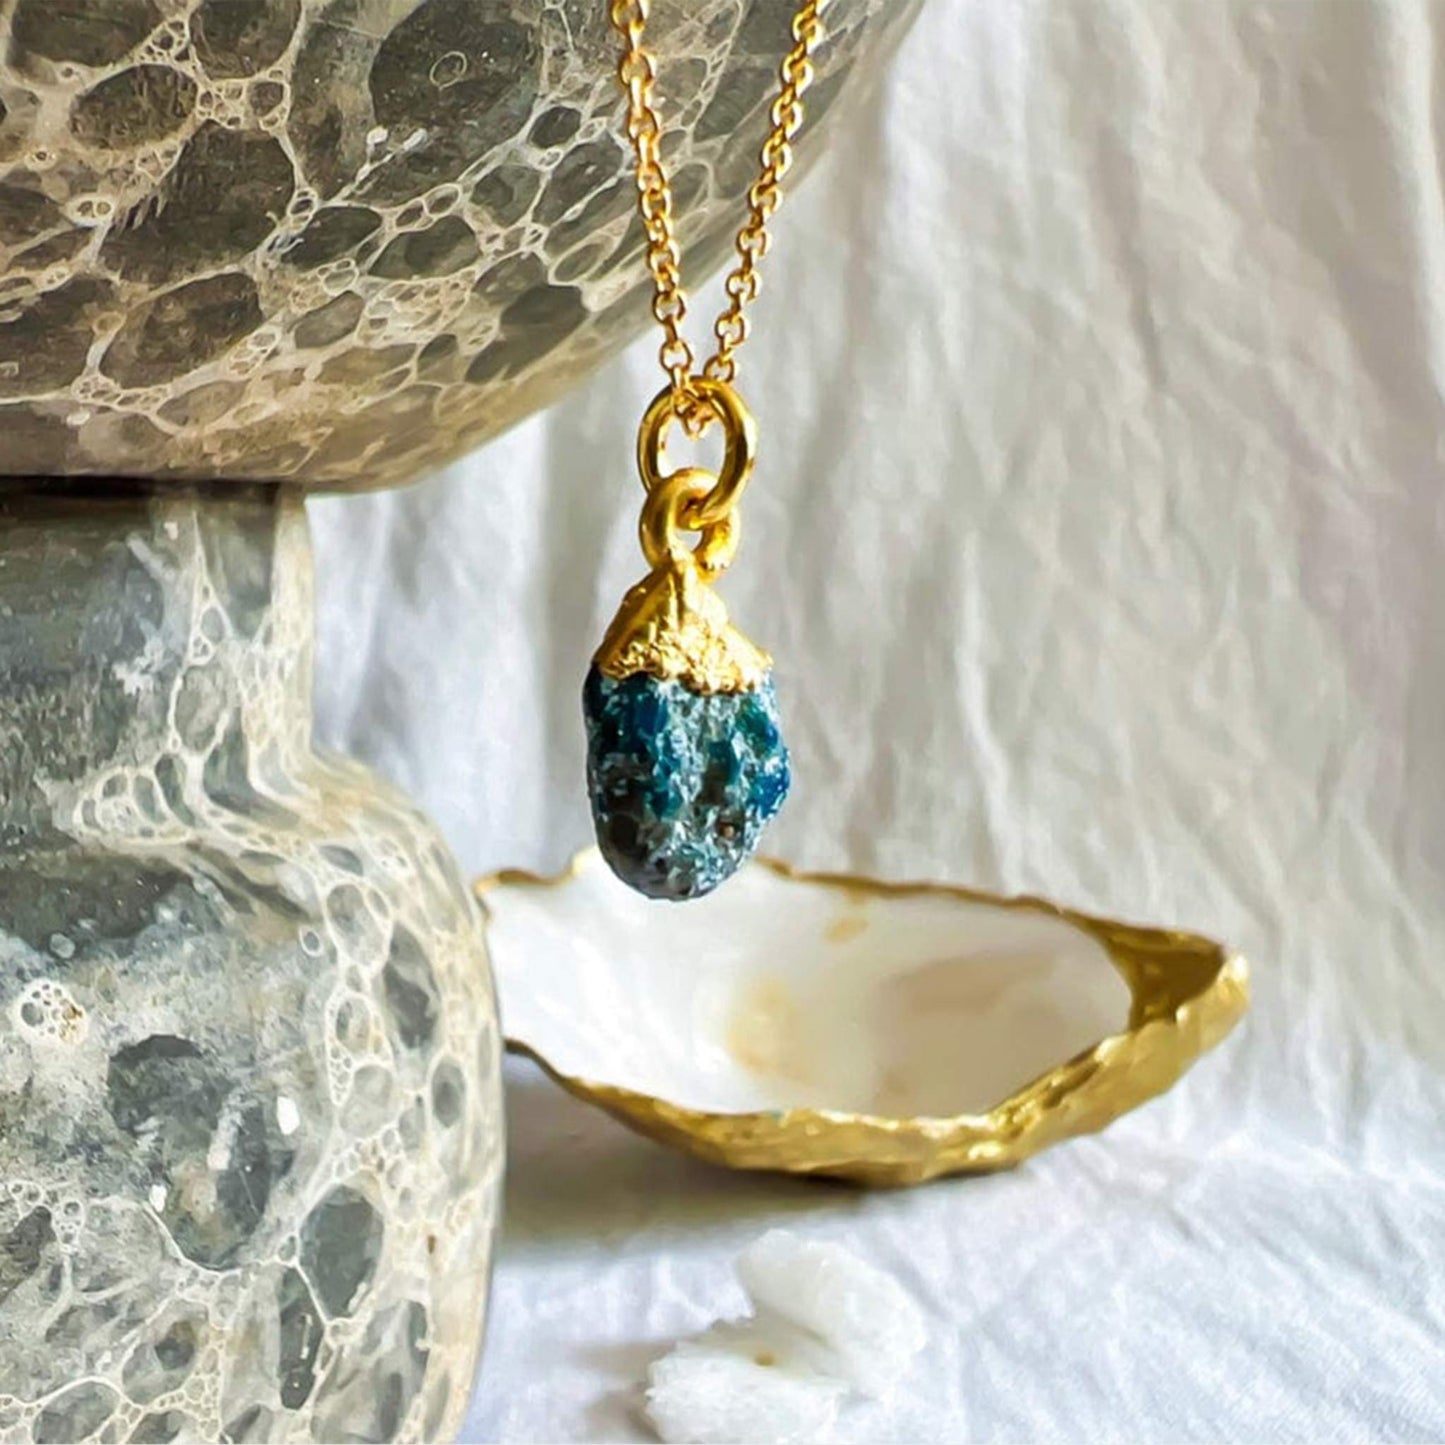 Raw Turquoise Pendant Necklace - Healing Crystal Jewellery | By Lunar James